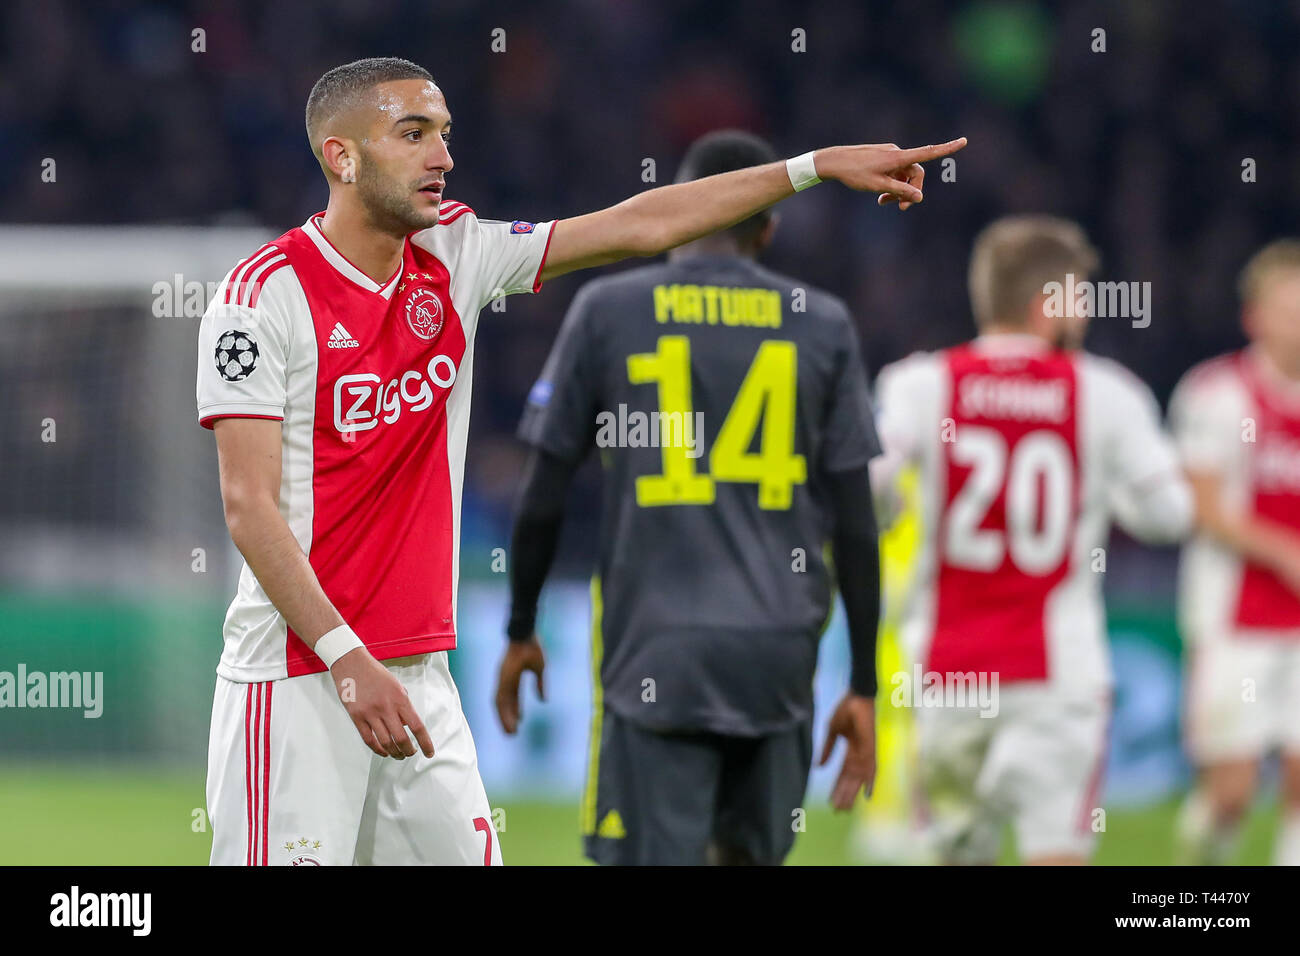 10th of april 2019 Amsterdam, The Netherlands Soccer Champions League Ajax v Juventus   Hakim Ziyech of Ajax Stock Photo